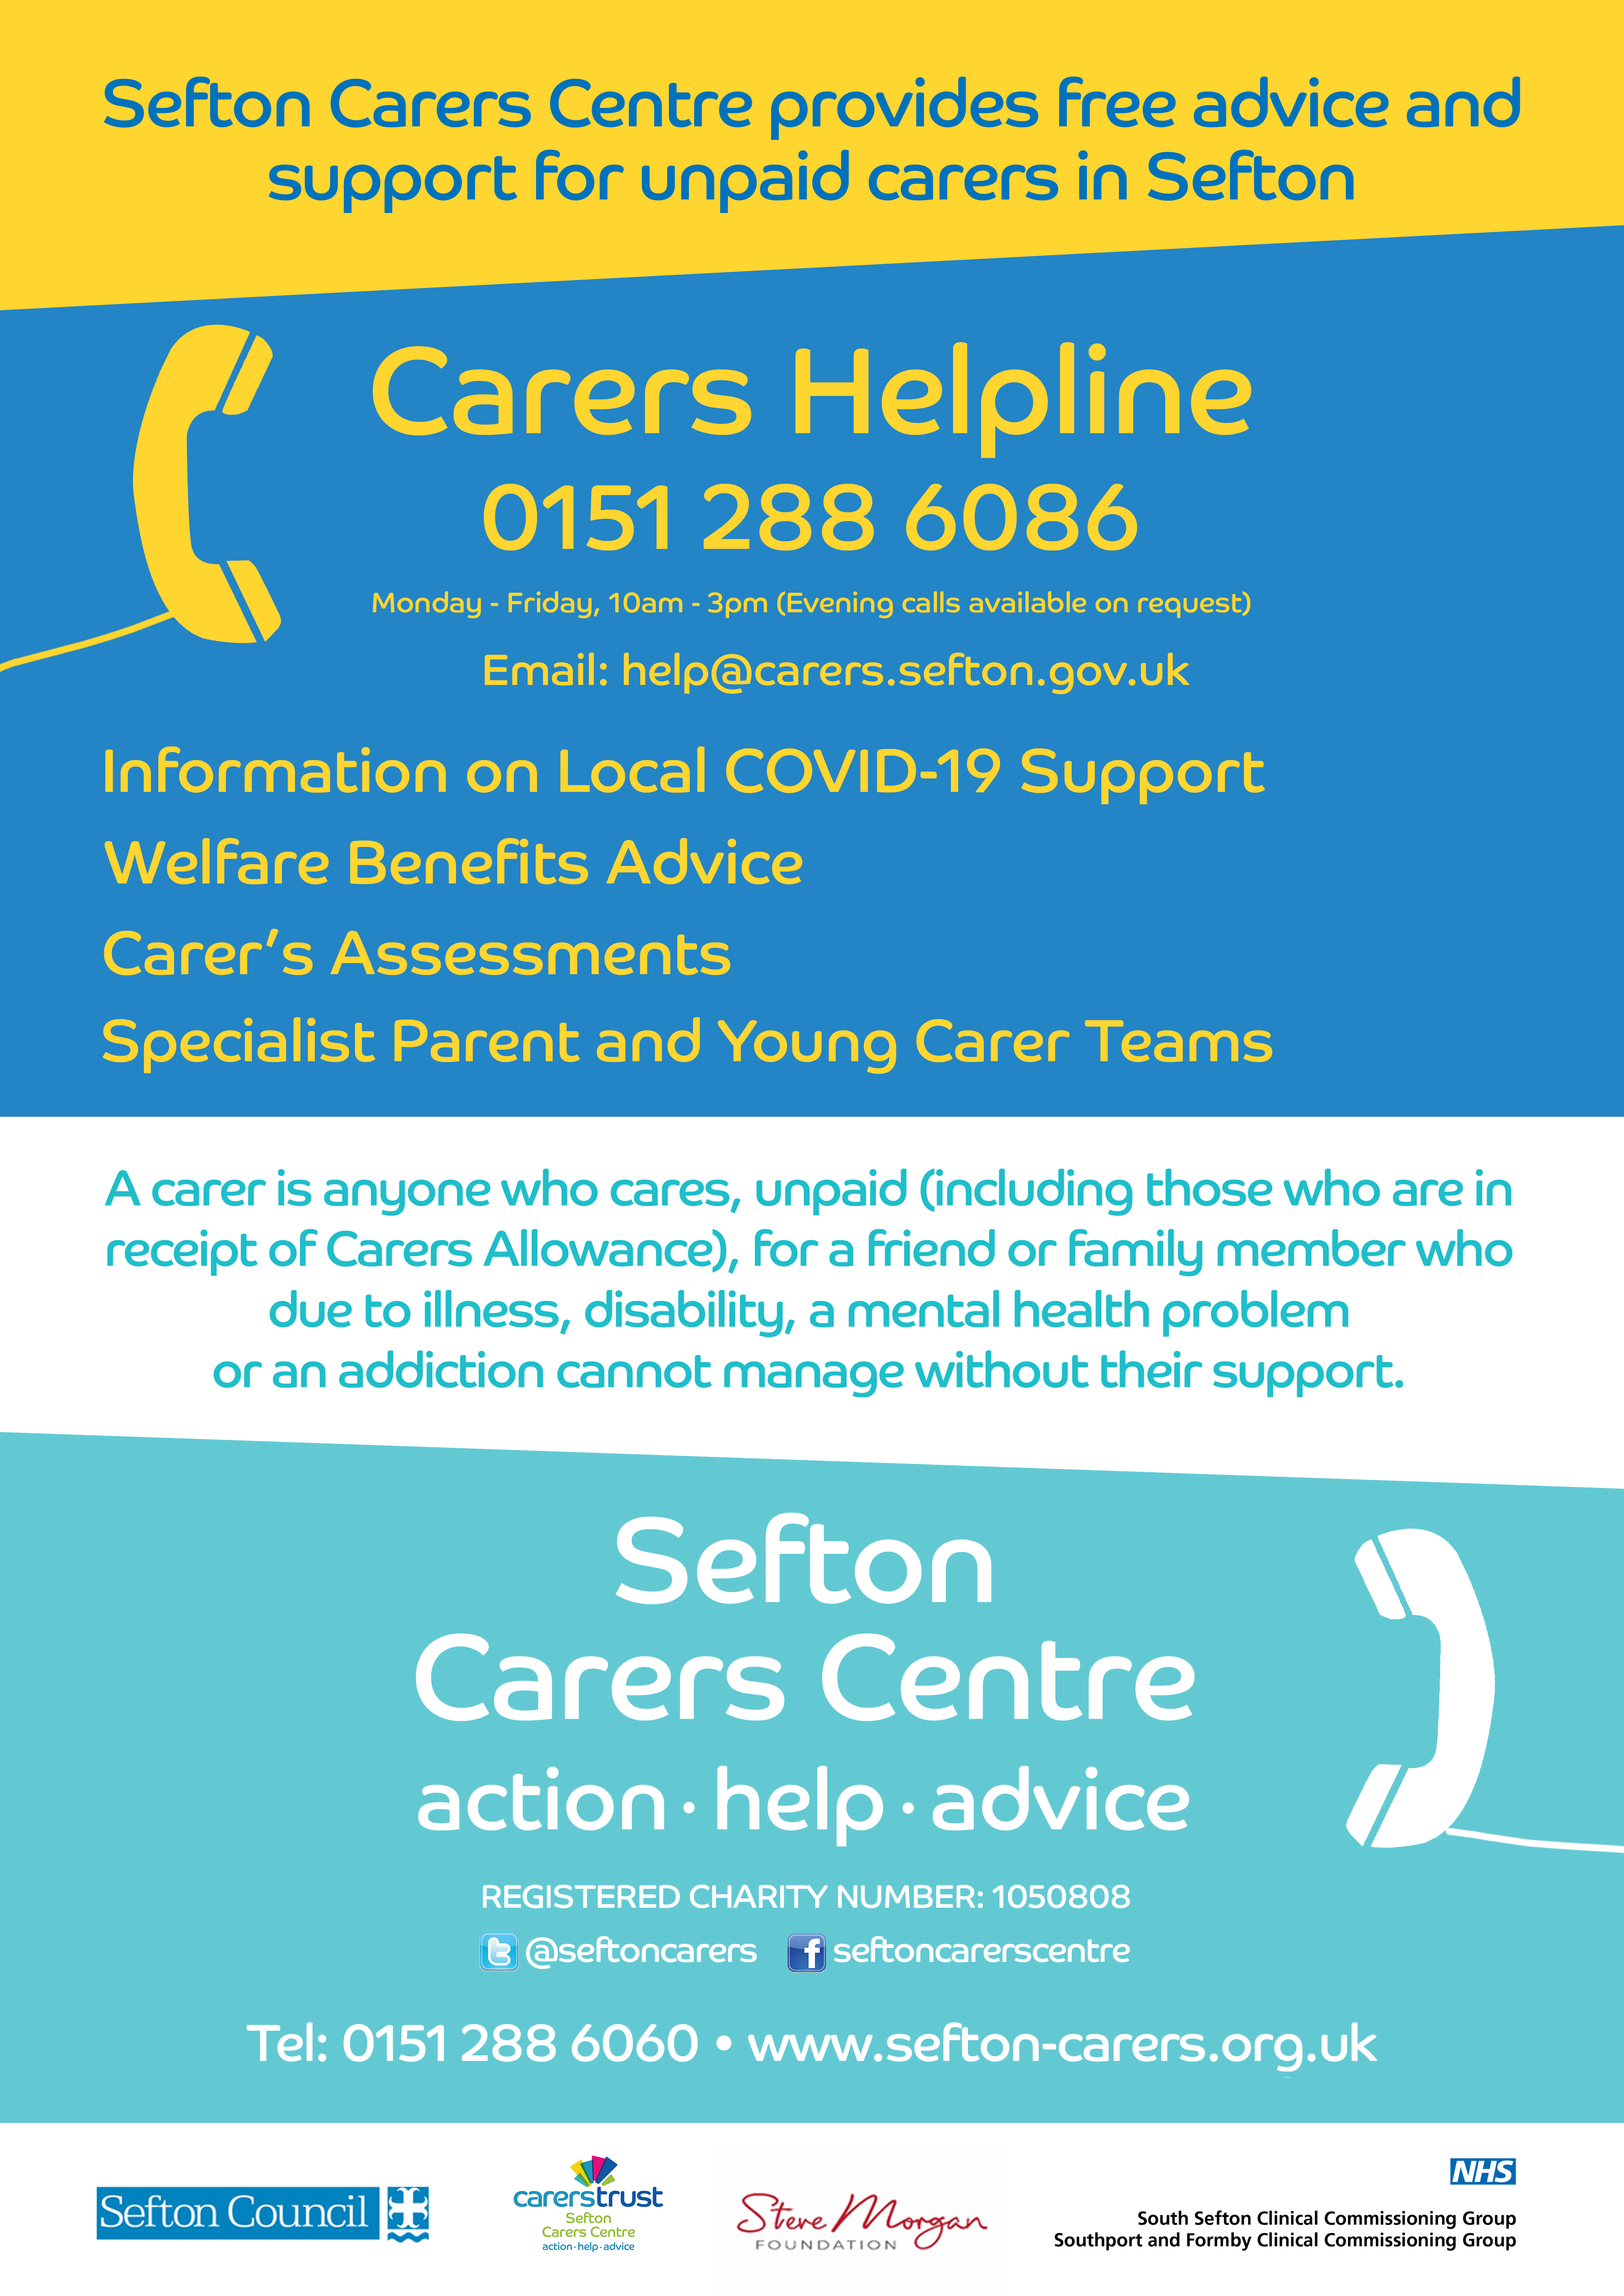 Sefton Carers Centre launches new helpline for unpaid carers